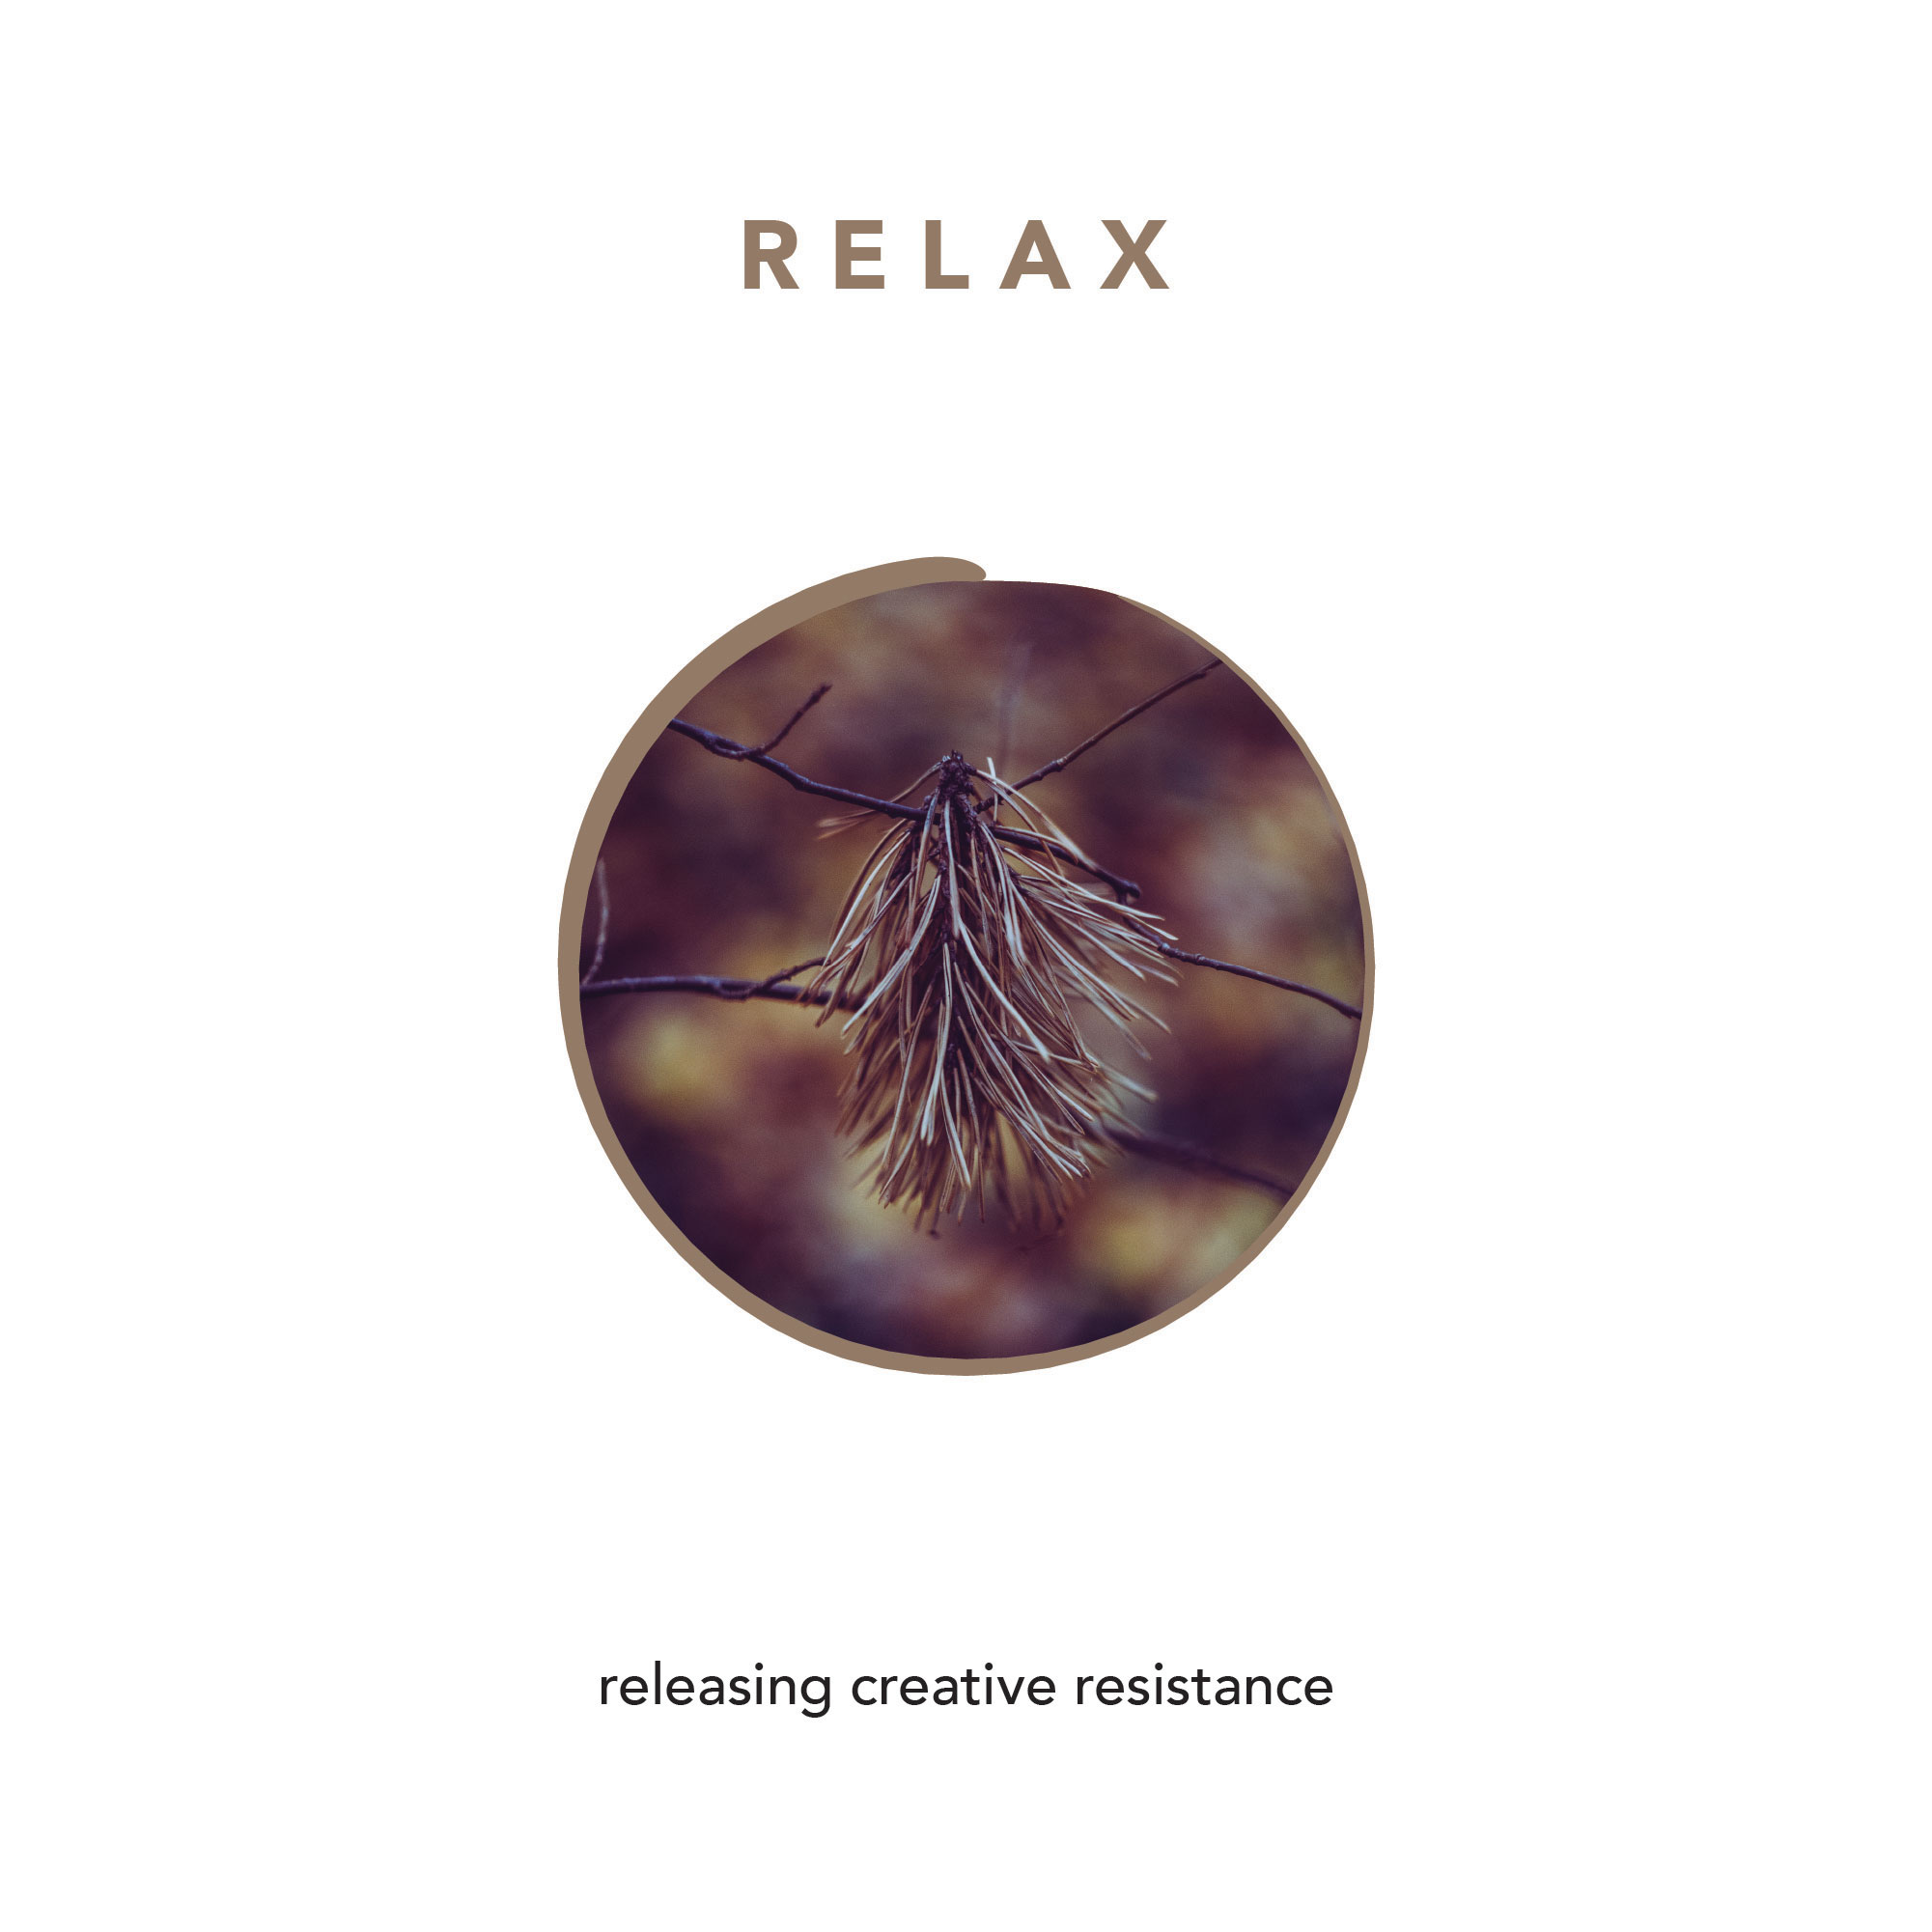 RELAX - allowing effortless creativity to flow through